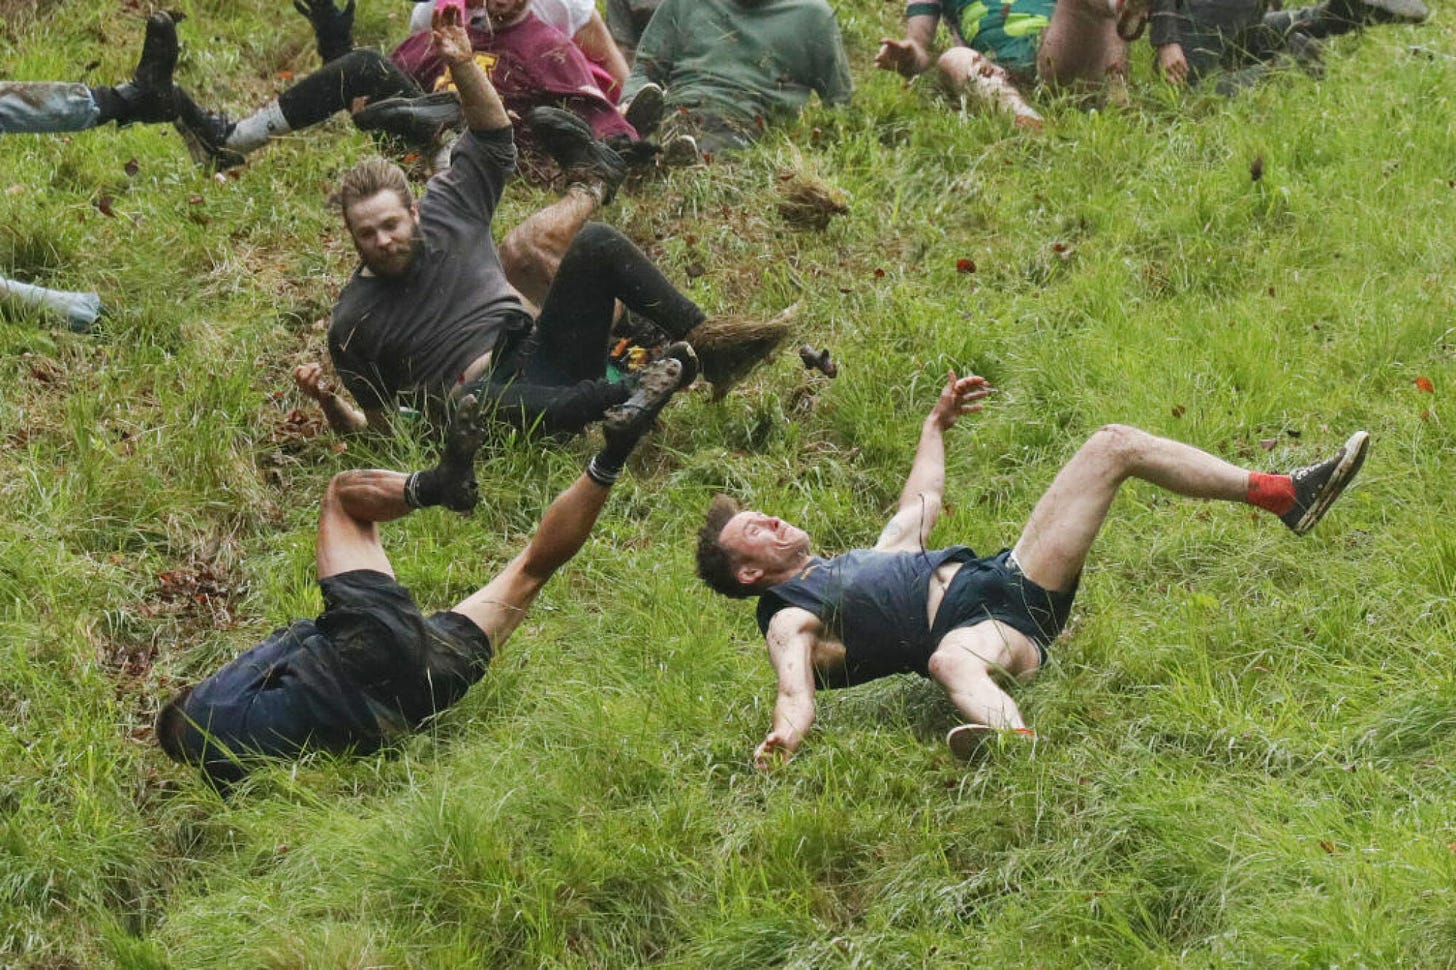 Chaotic photos from the UK's annual cheese rolling contest | Mashable